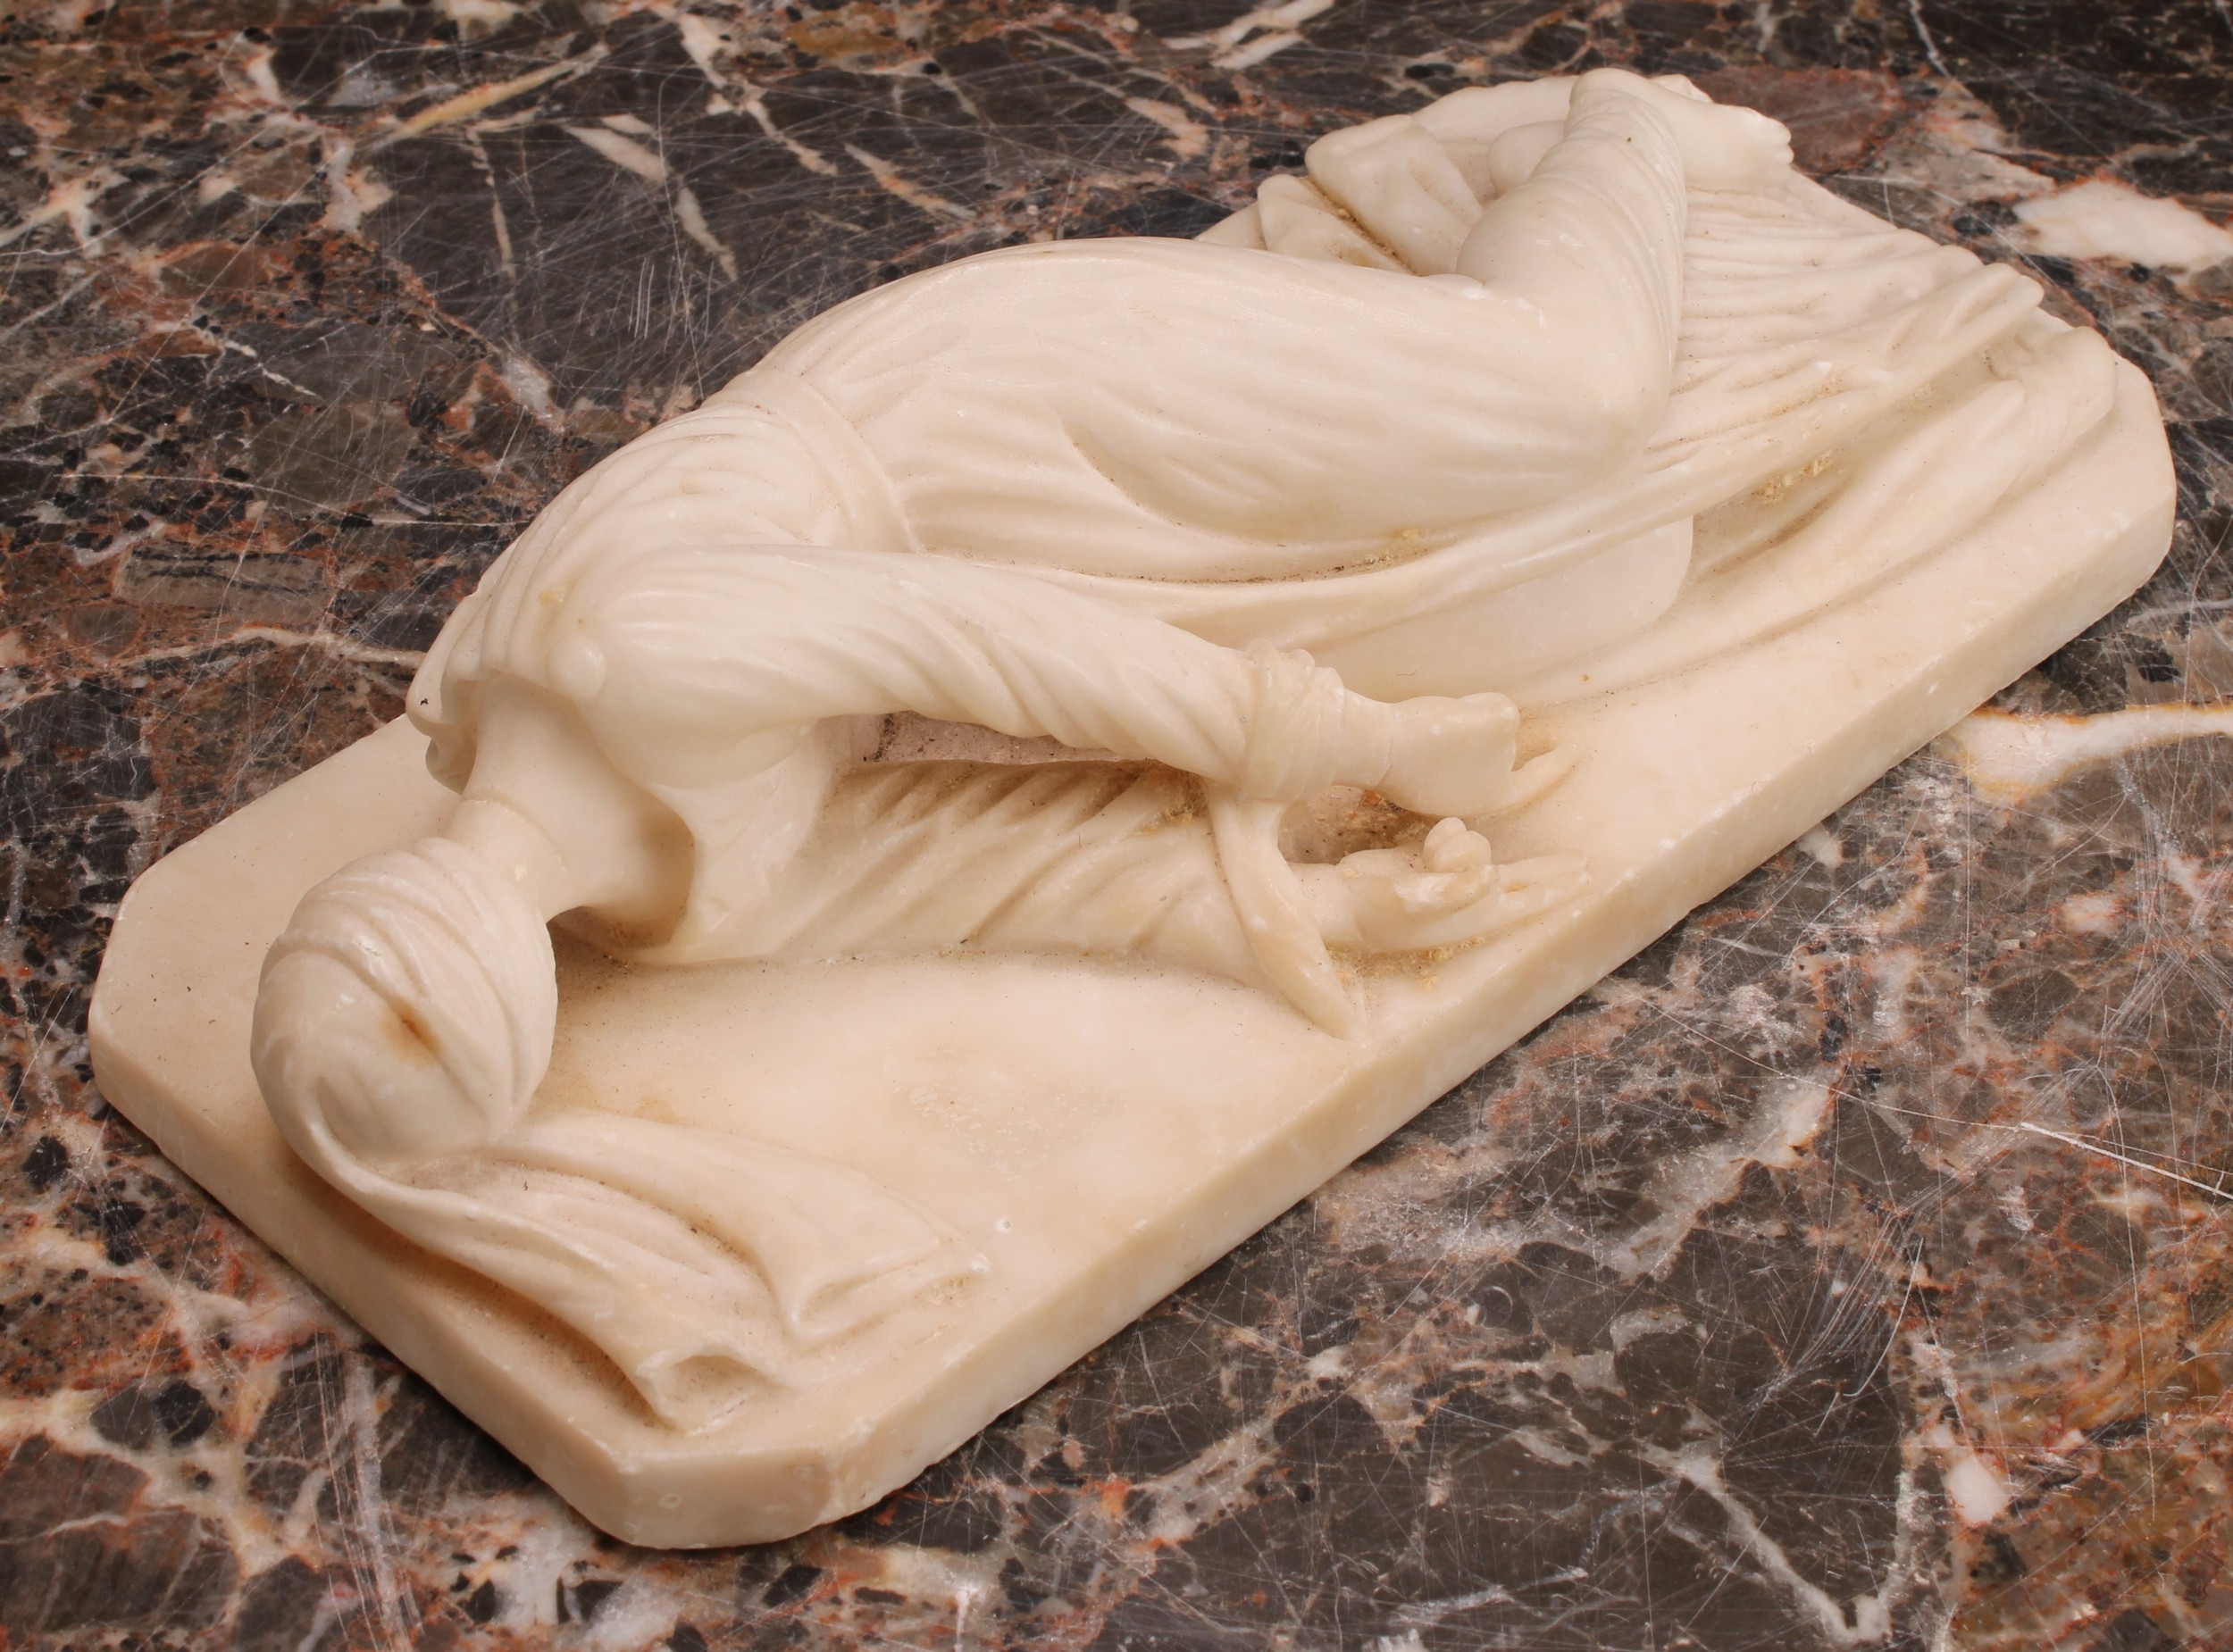 Italian School (early 20th century), an alabaster carving, St. Cecilia, a smaller rendition of the - Image 3 of 4